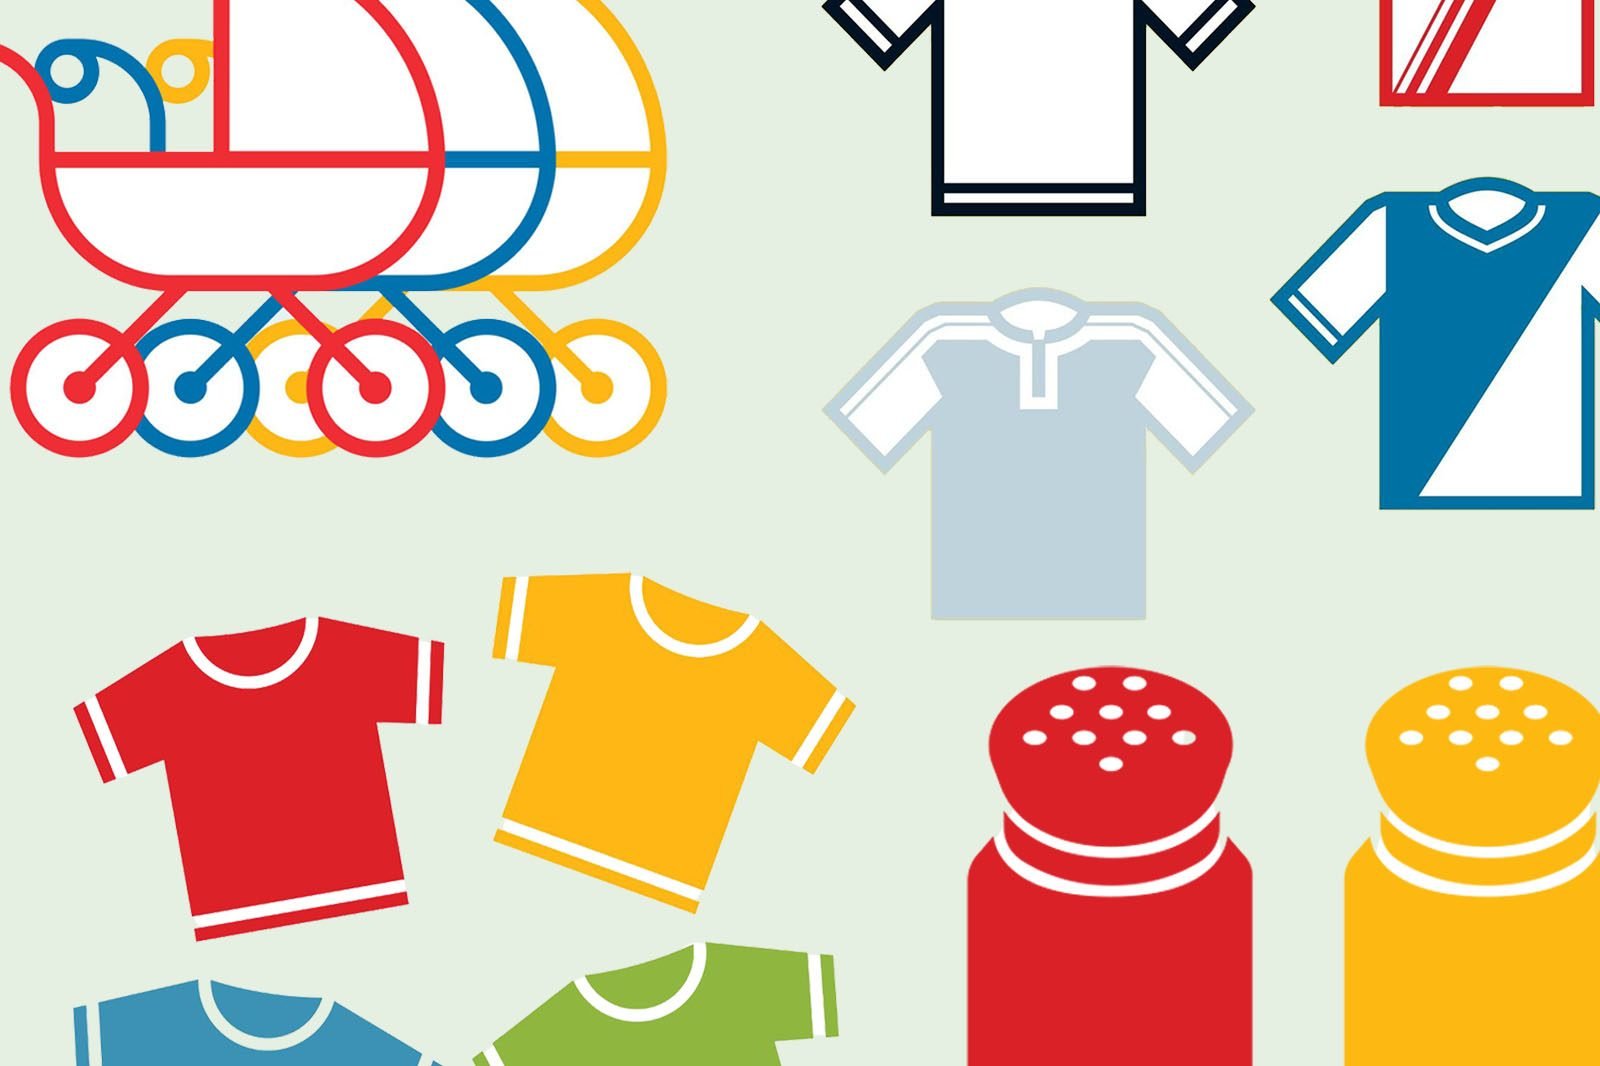 Mystery club quiz: Three national team kits, one clue - can you